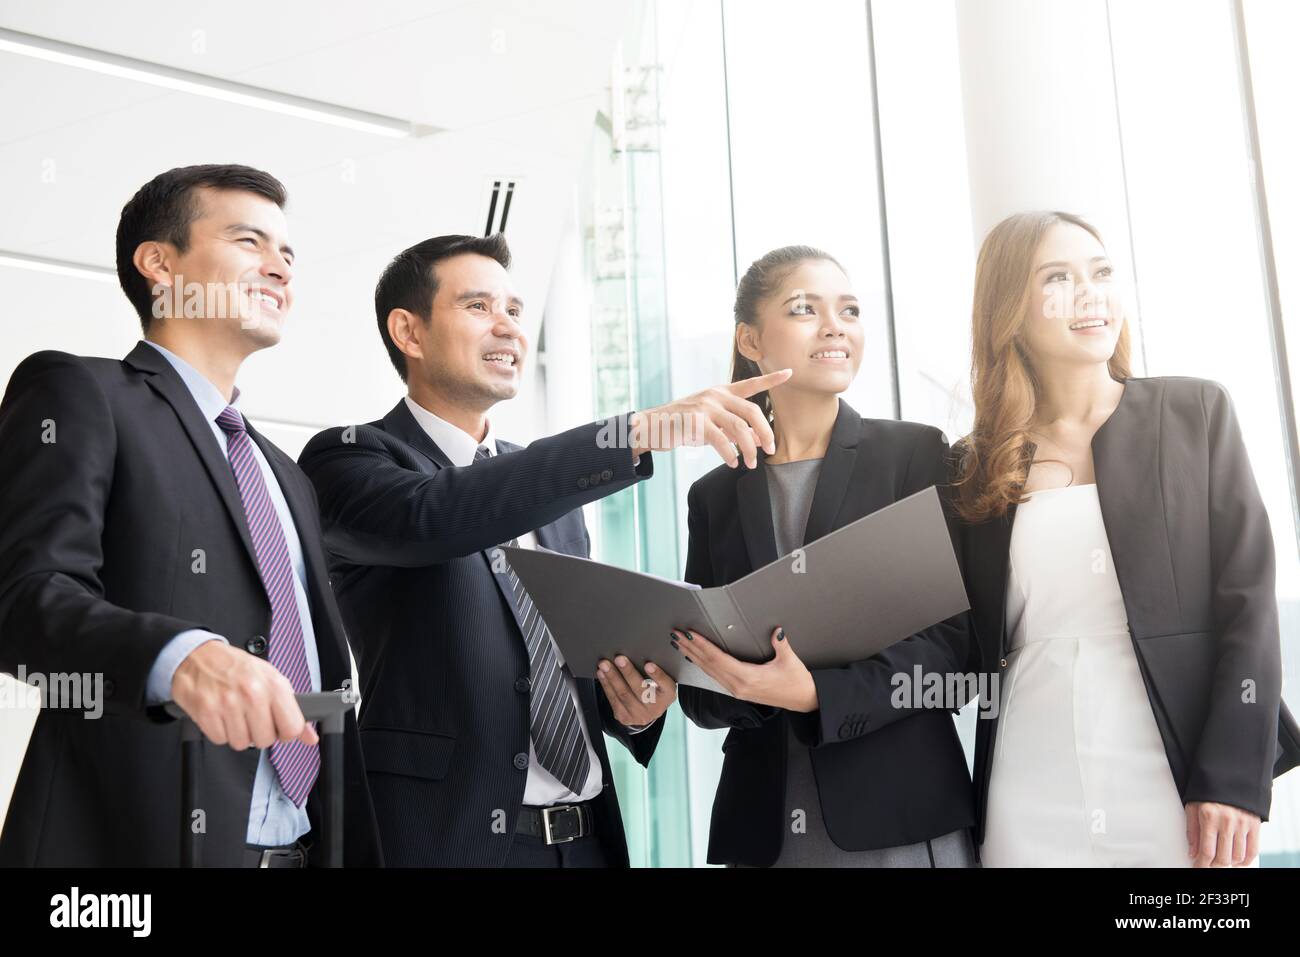 Group of business people discussing work in building hallway Stock Photo